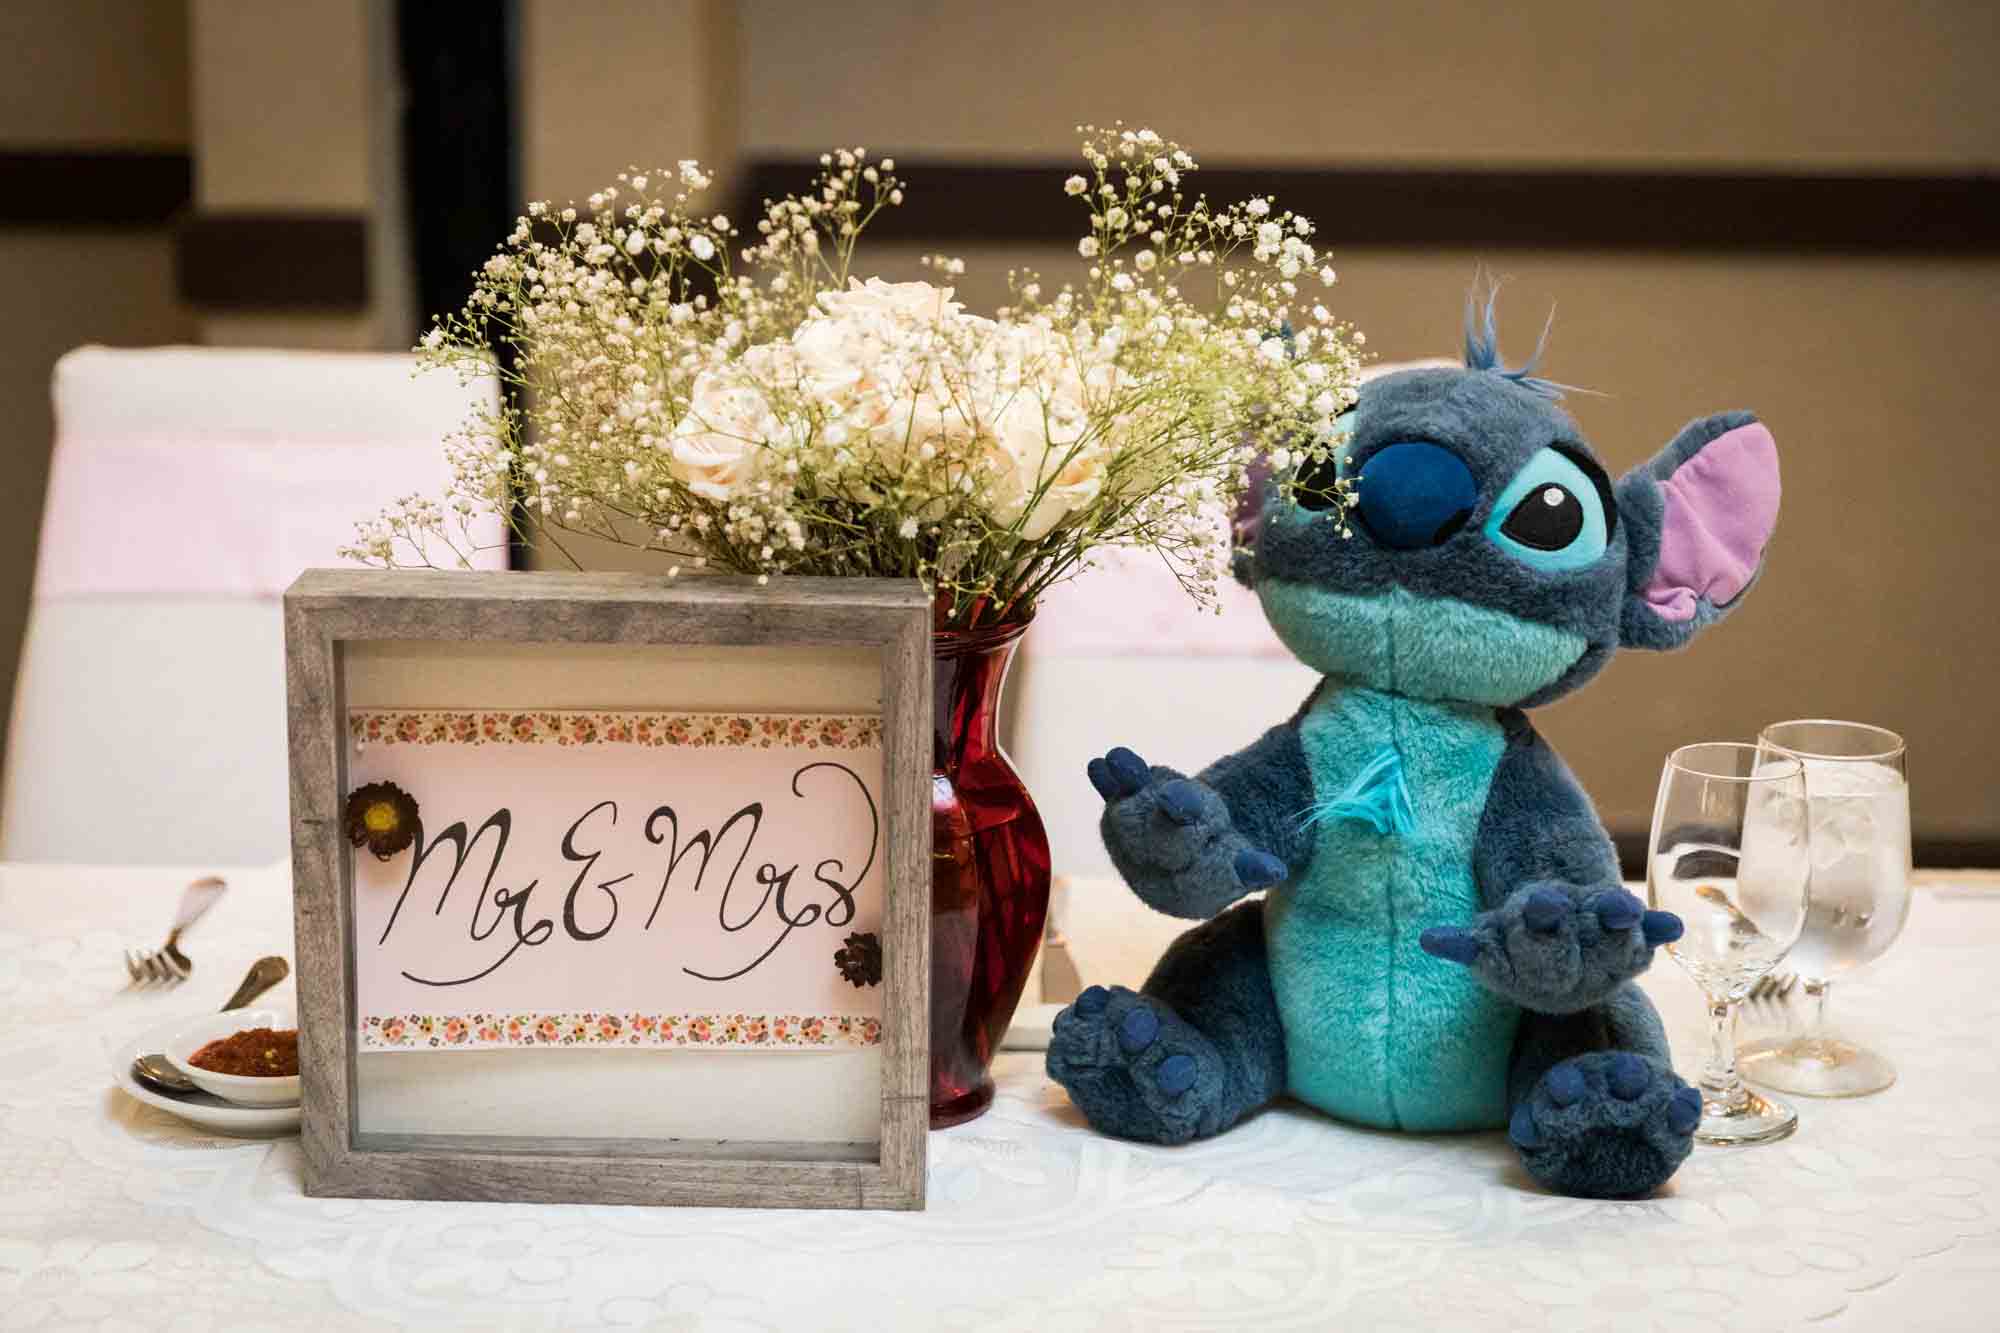 Sweetheart table centerpiece with 'Mr. and Mrs.' sign, flower bouquet, and stuffed blue animal at a Sheraton LaGuardia East Hotel wedding